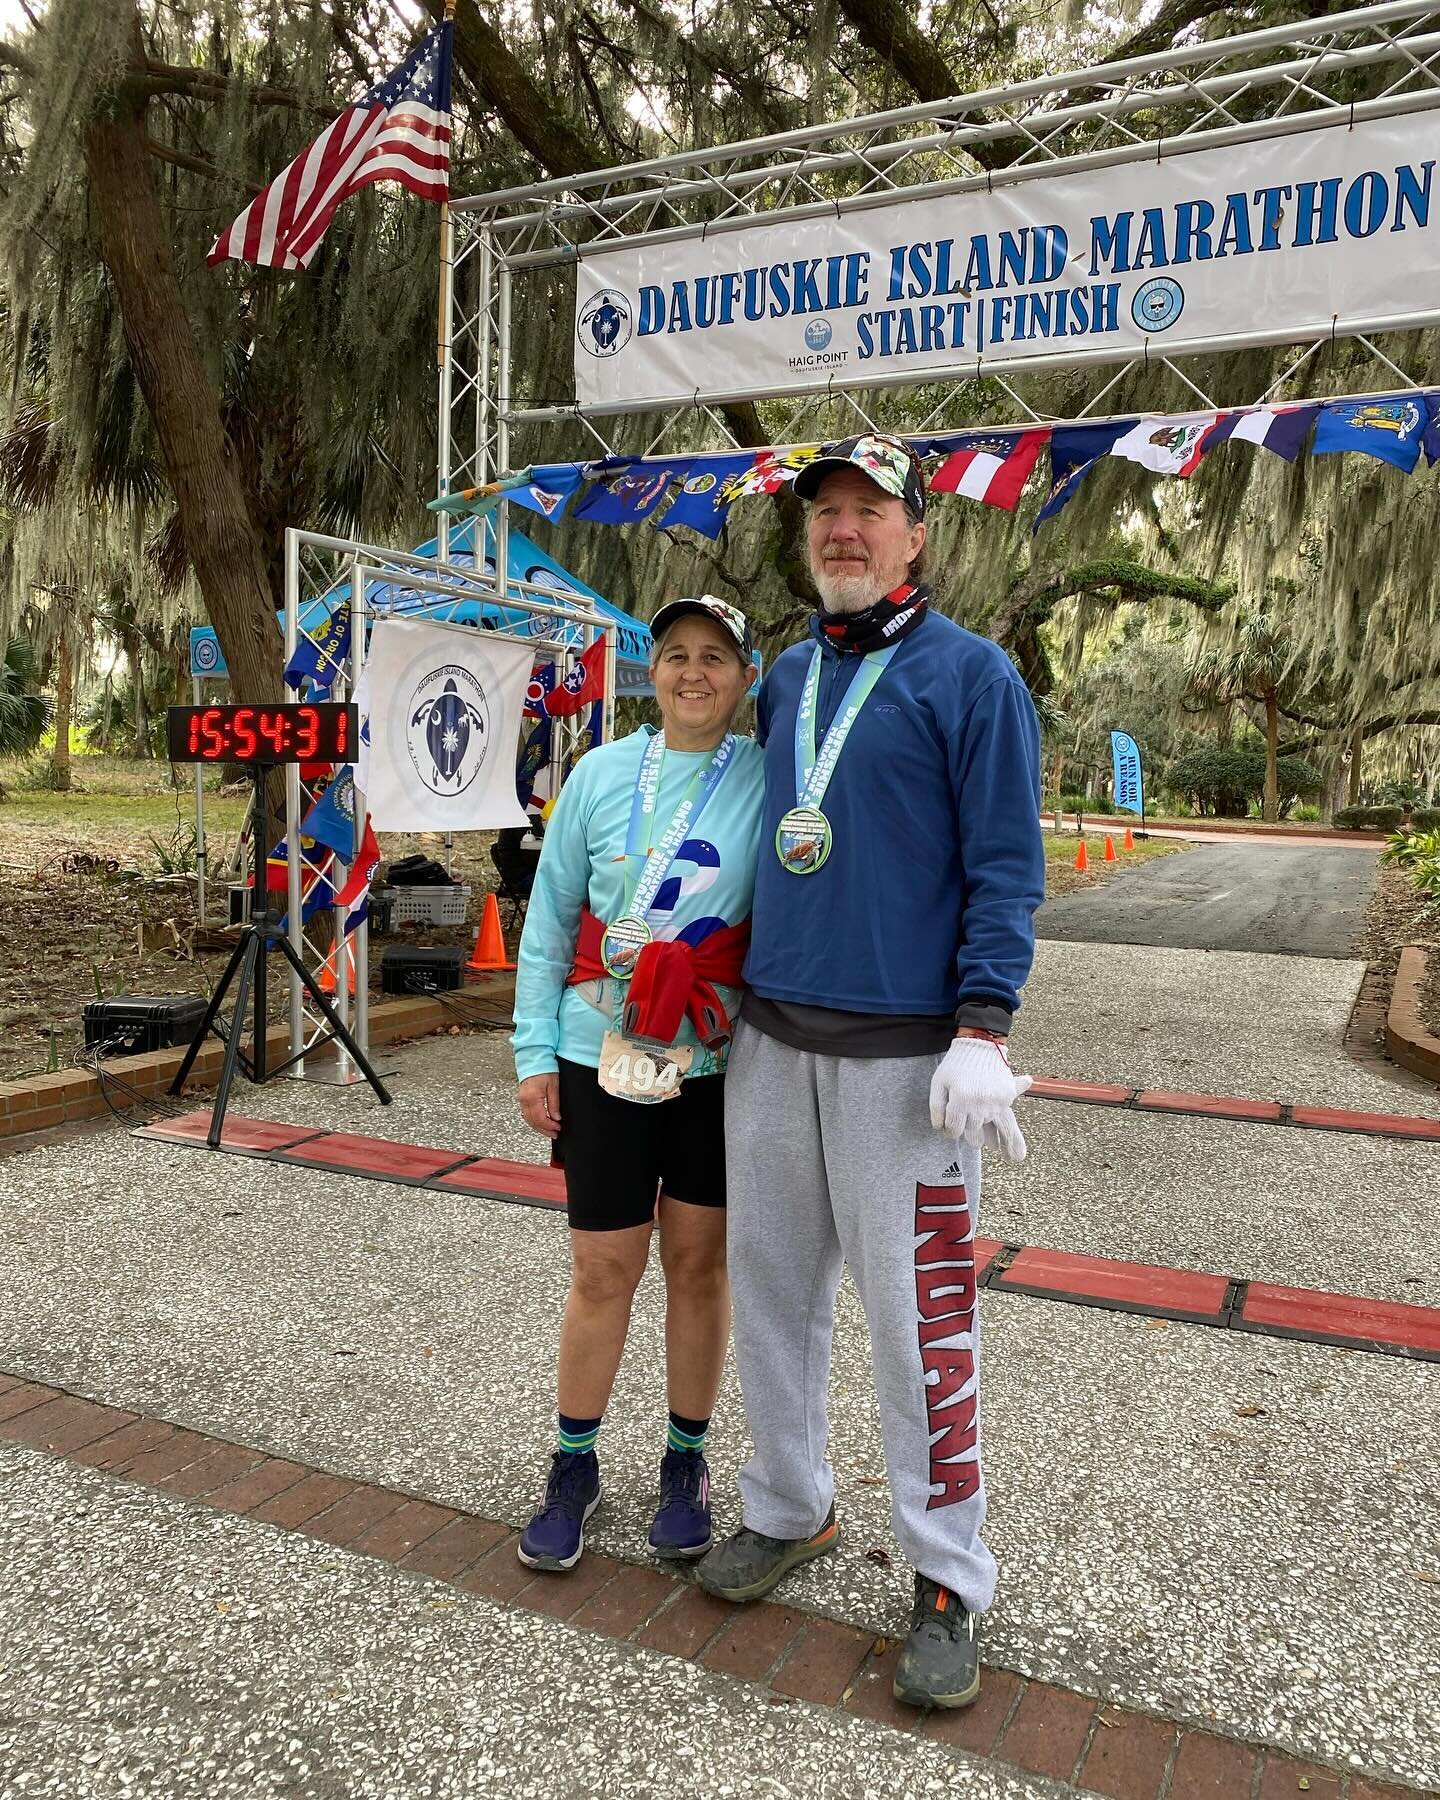 Here are a few special memories made at the Daufuskie Island Marathon and Half this weekend!
Thank you all for sharing your running journey with Rough Runners on this enchanting island!
Take care and be well!
#rundaufuskie #runwithroughrunners #desti